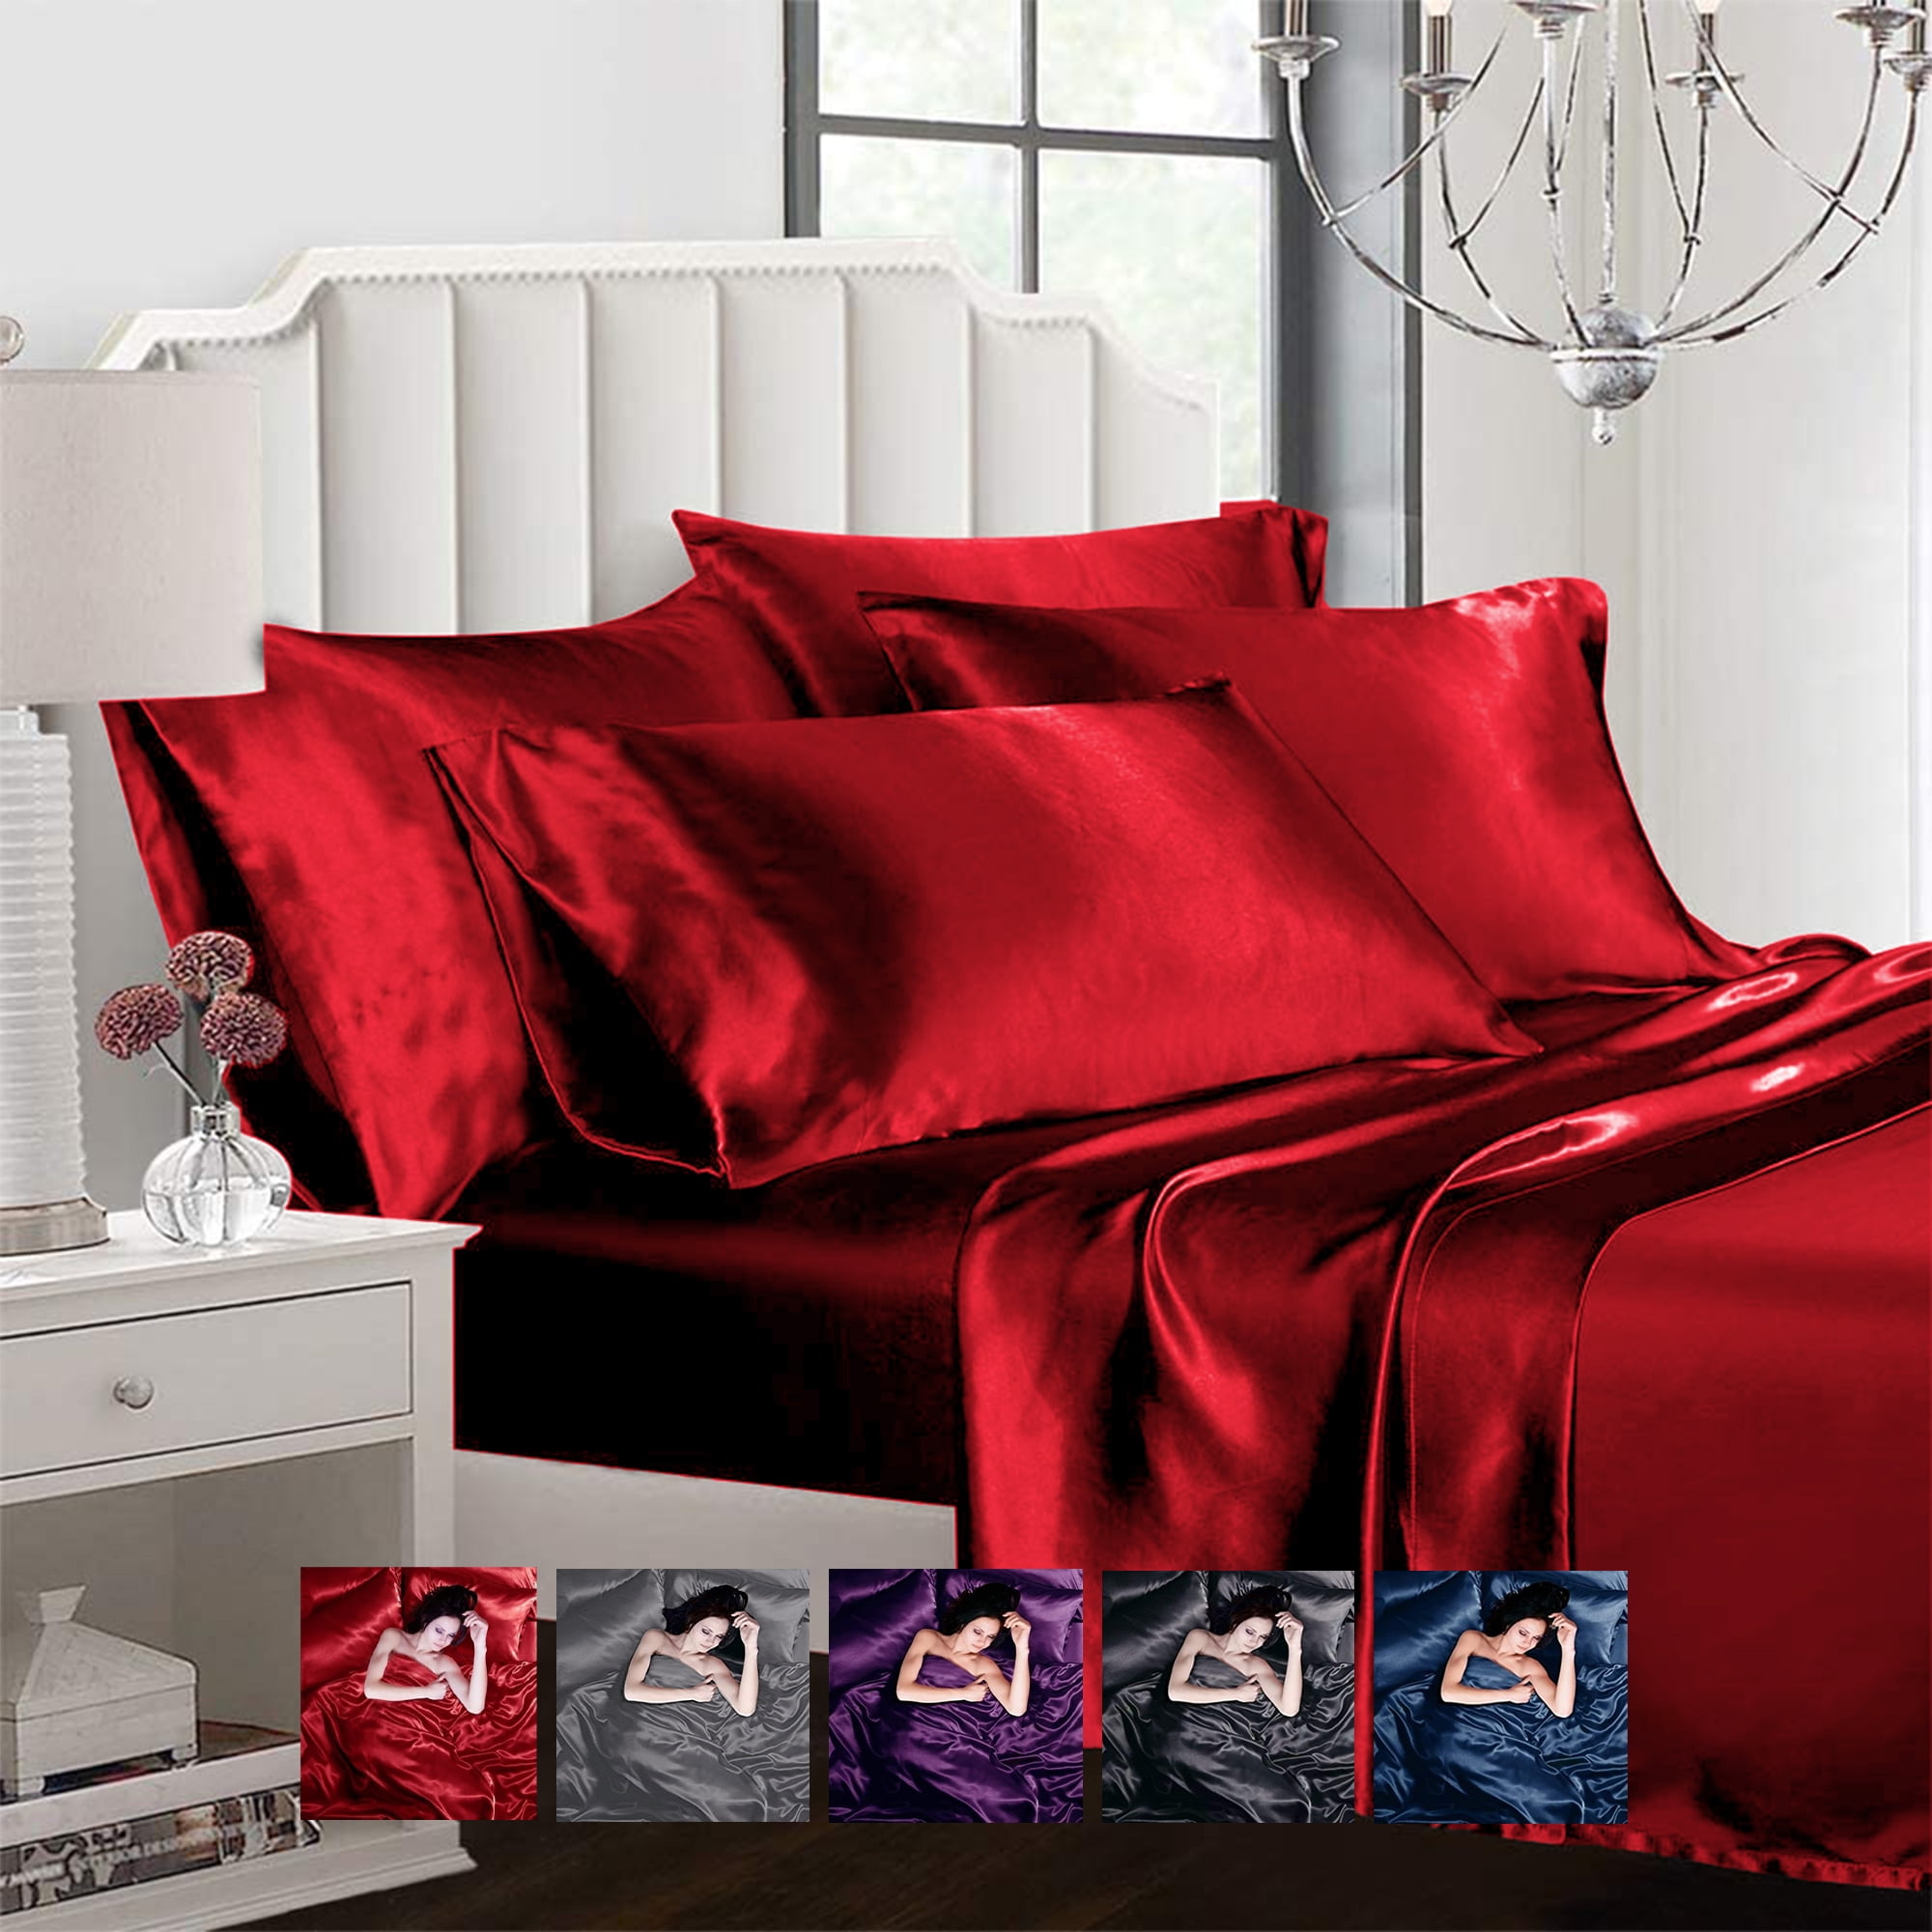 Y Bedding Set Queen Duvet Cover, What Are The Dimensions Of A Queen Duvet Cover